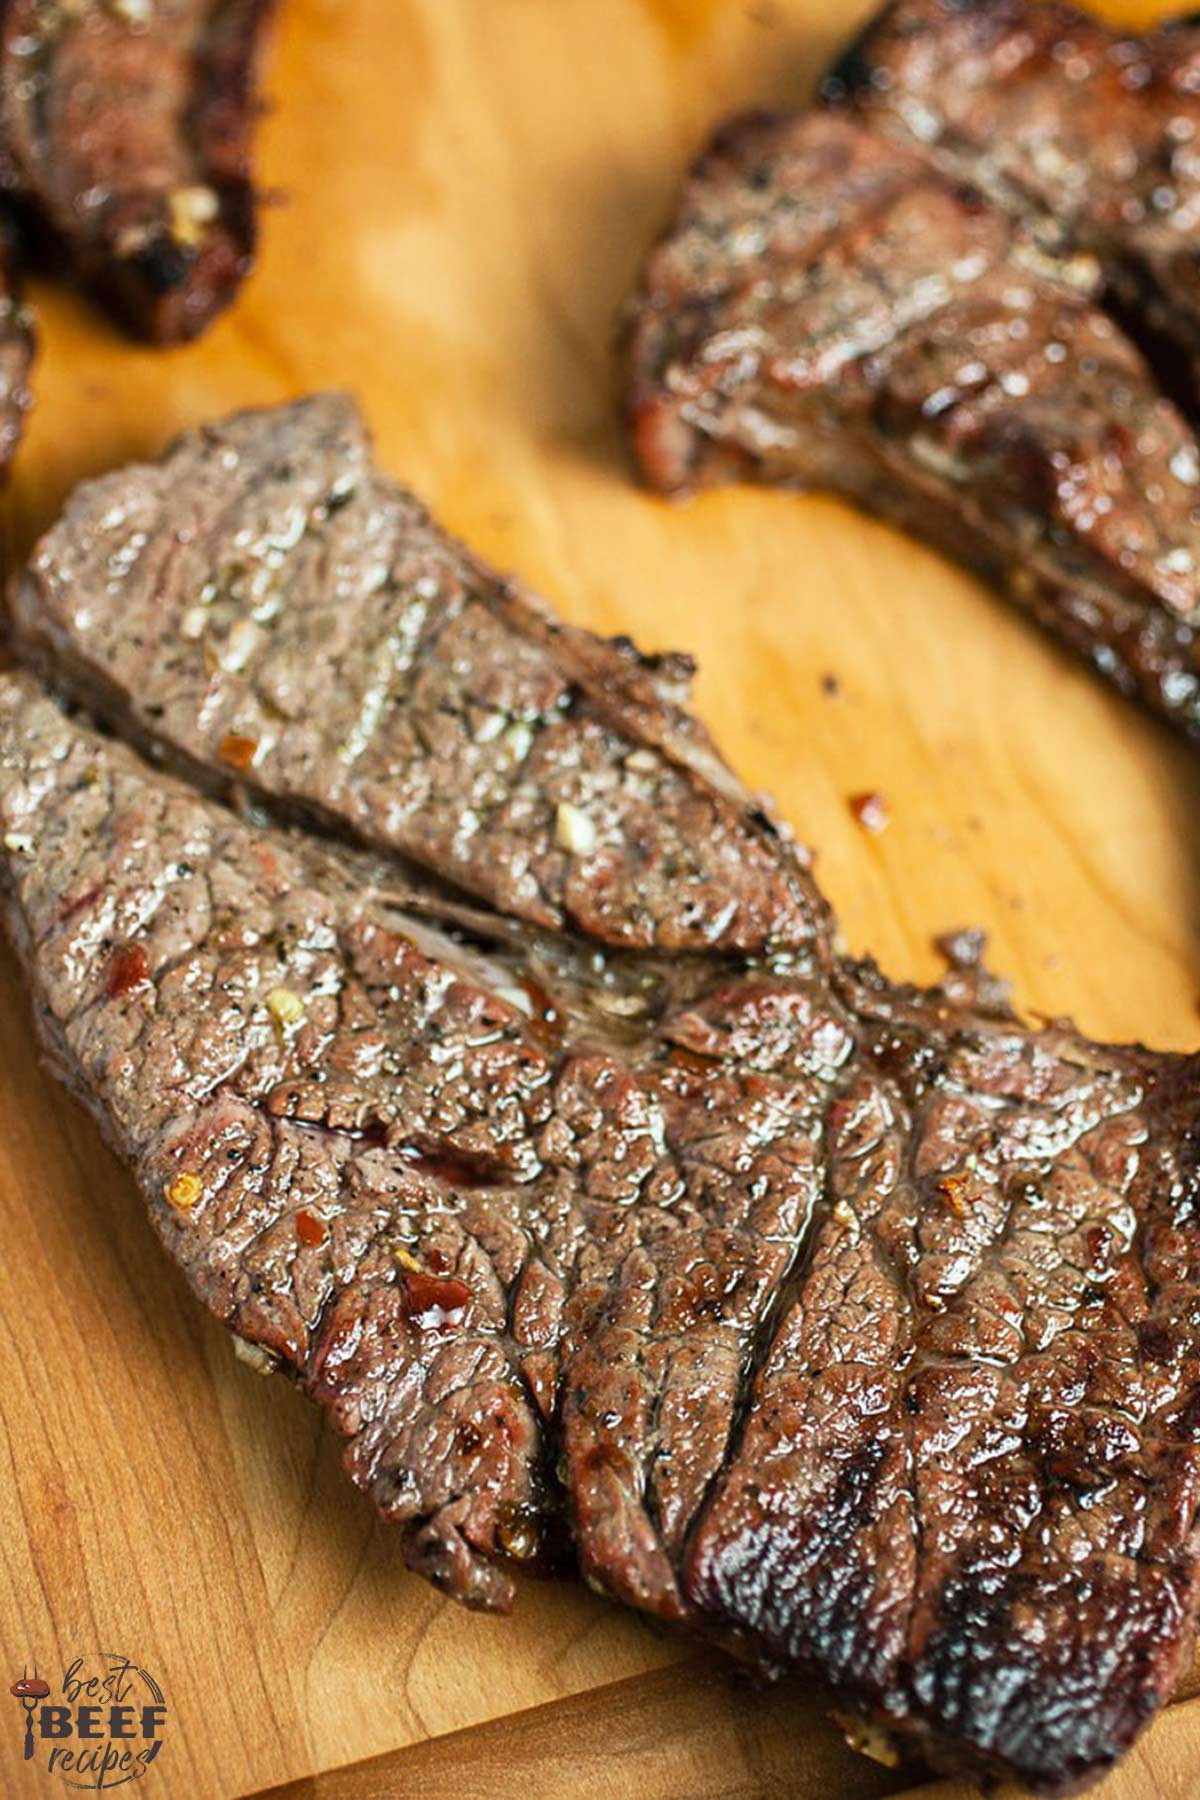 Grilling Beef Chuck Steak
 Grilled Chuck Steak Recipe with pound Butter